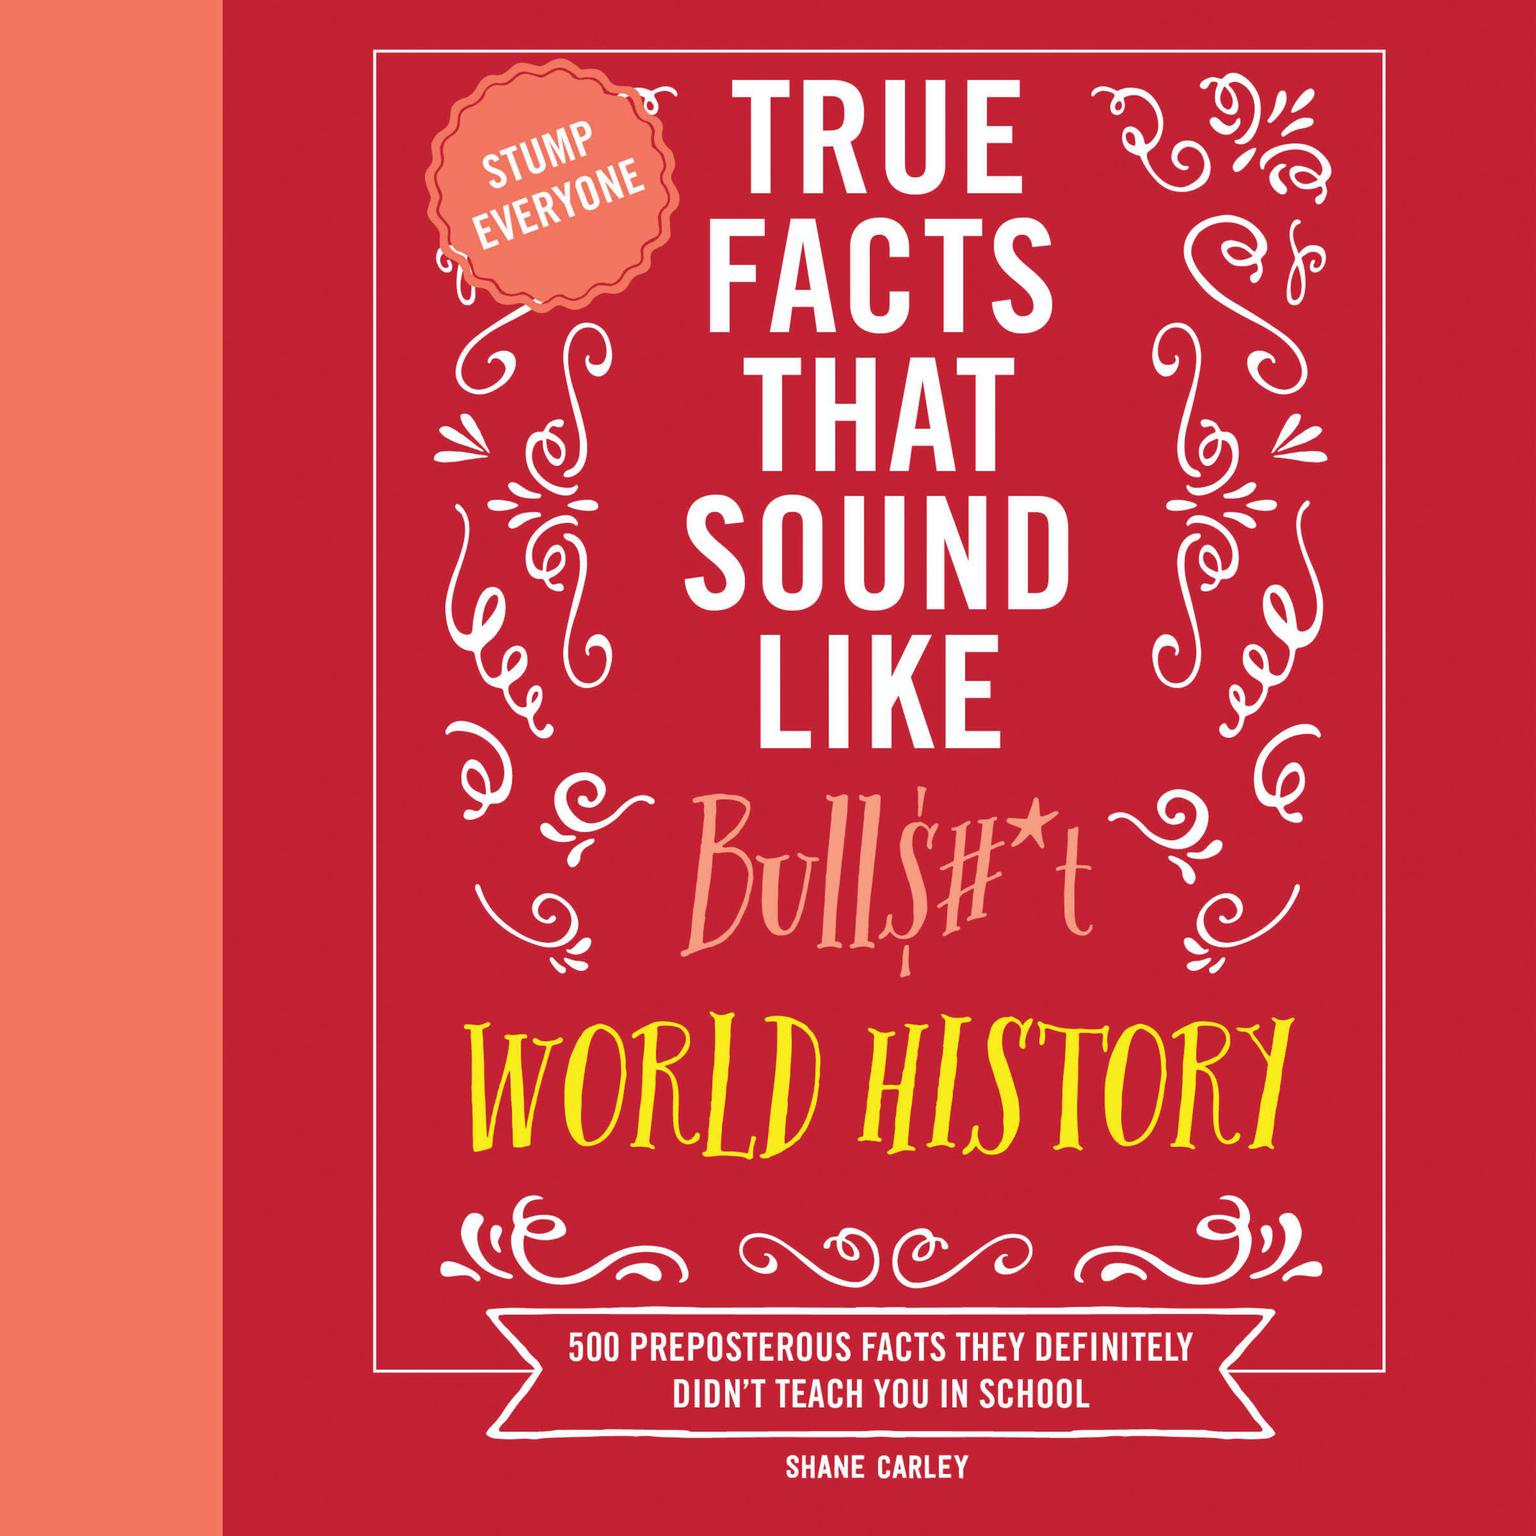 True Facts That Sound Like Bull$#*t: World History: 500 Preposterous Facts They Definitely Didn’t Teach You in School Audiobook, by Shane Carley